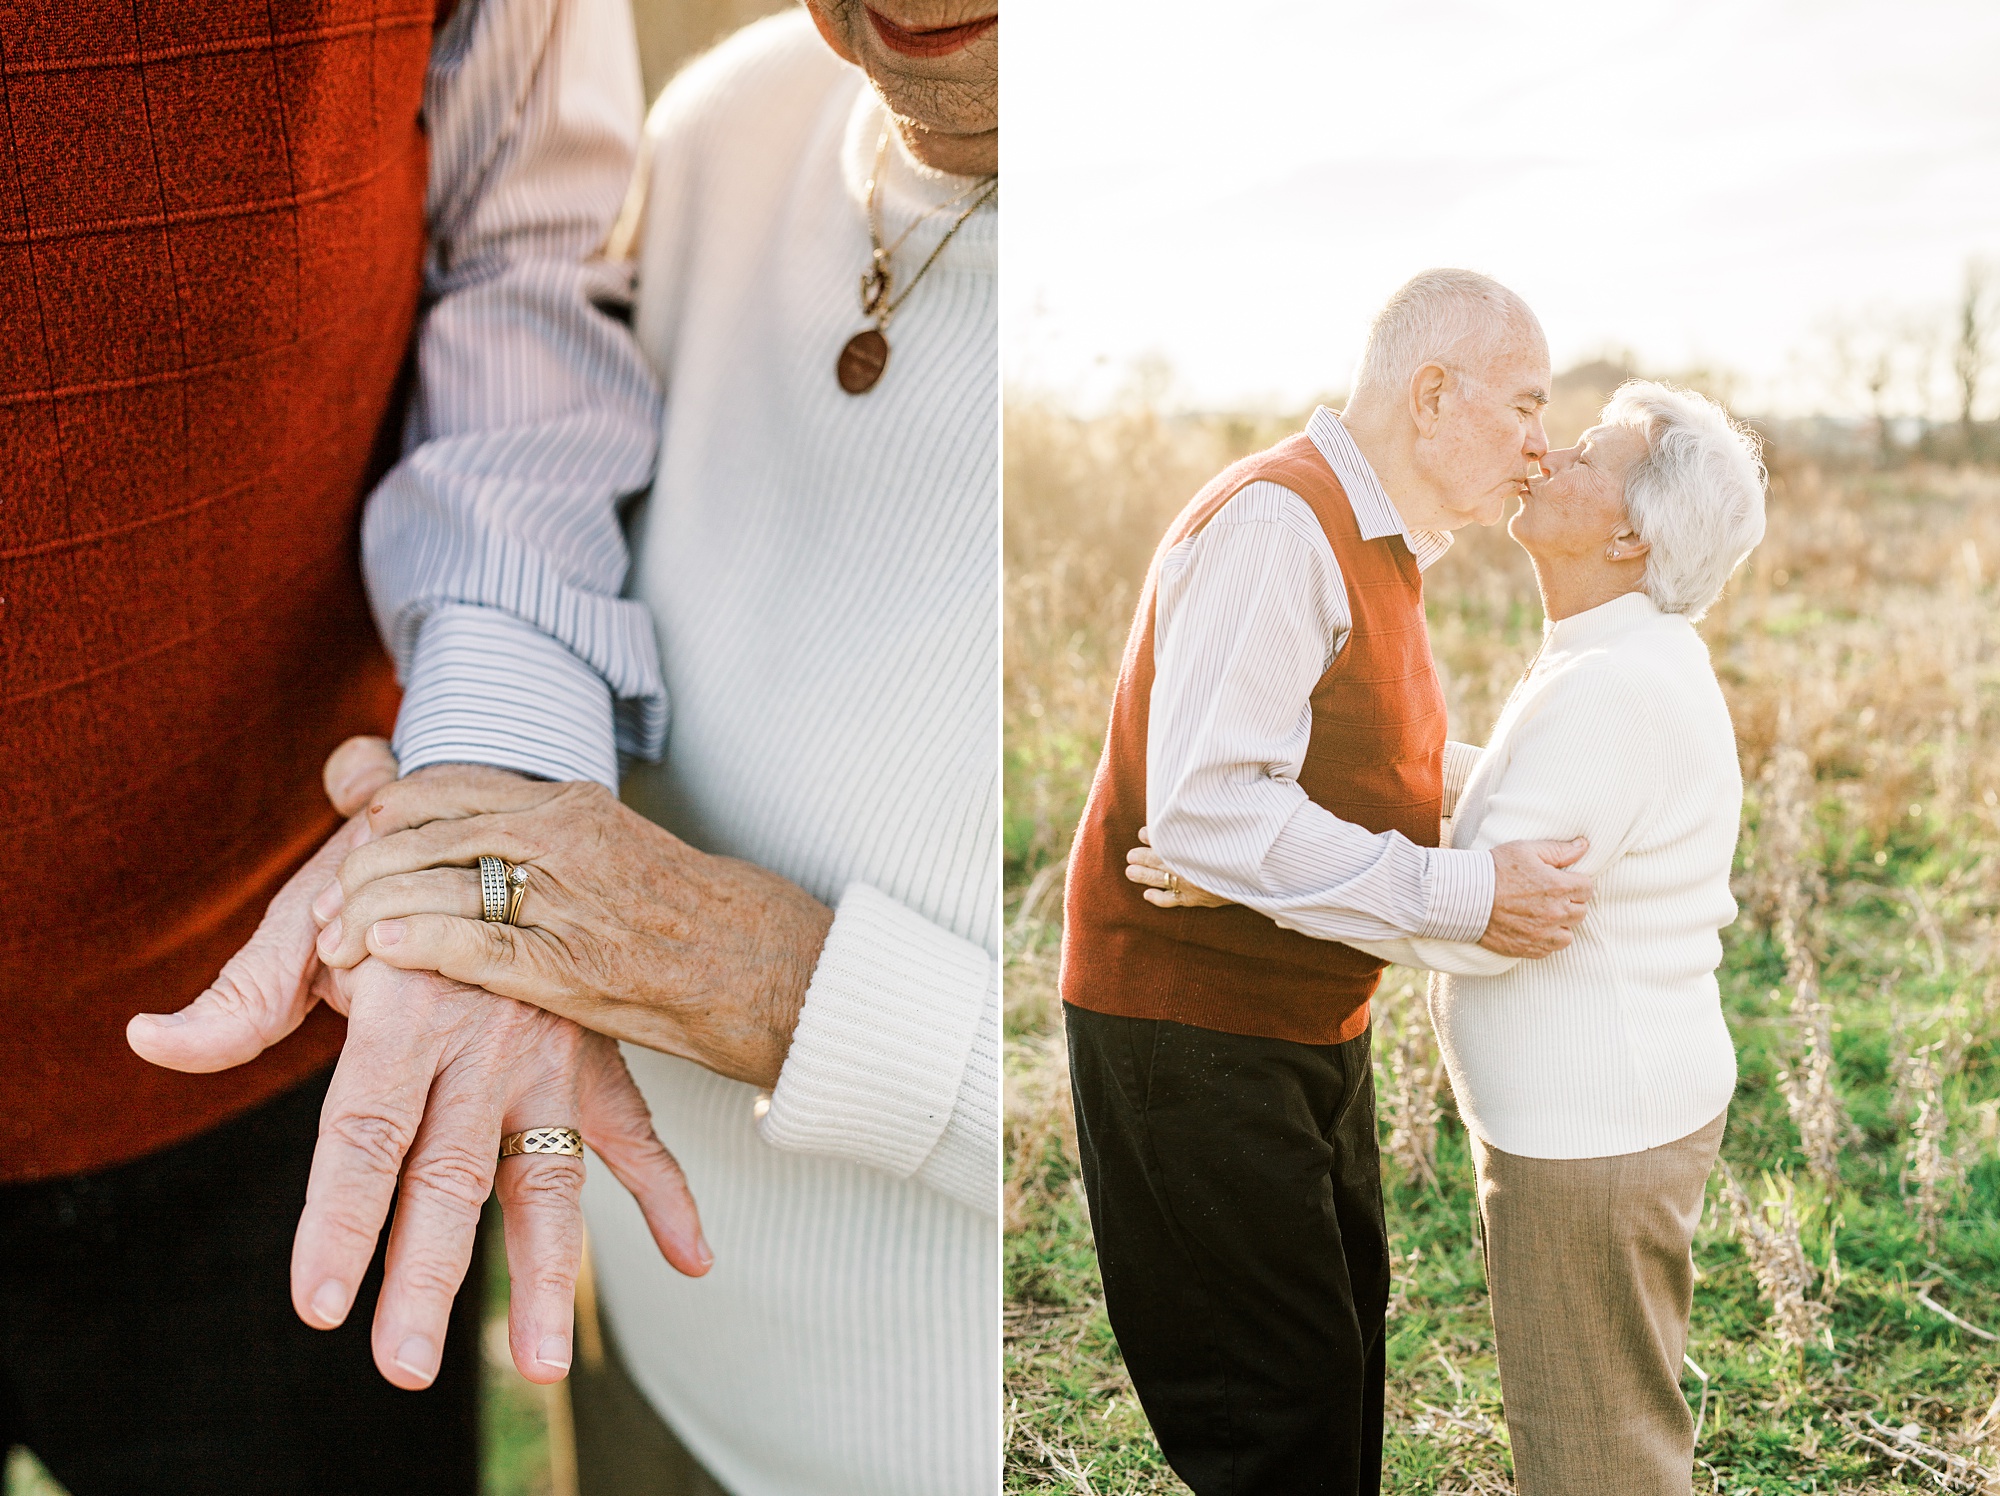 husband and wife show off wedding bands during family portraits